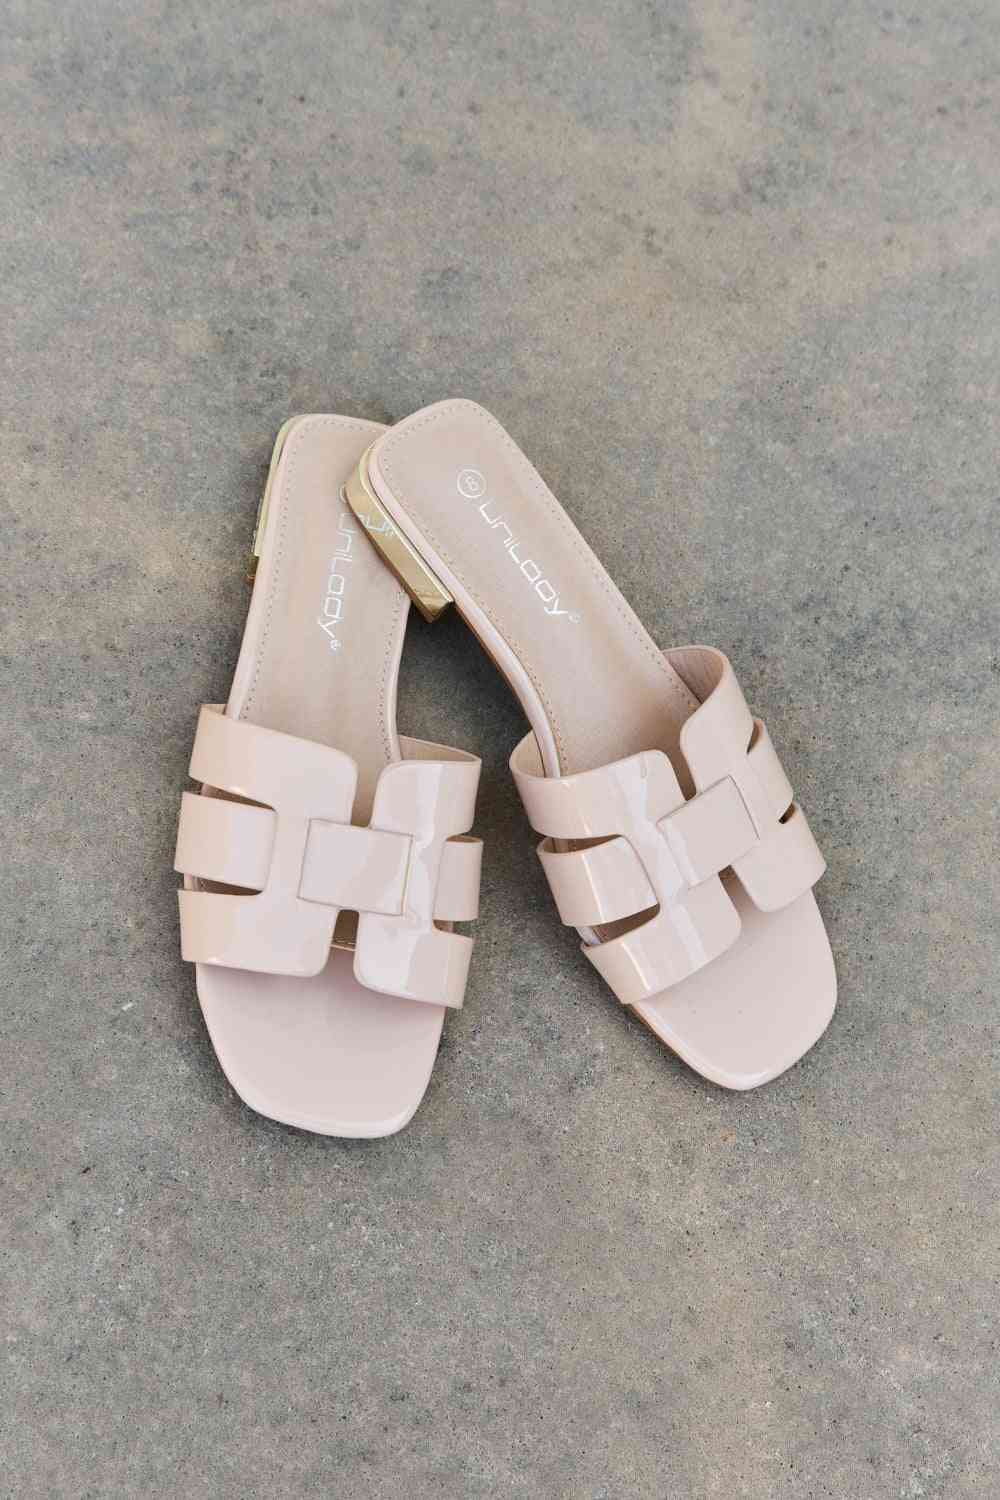 Walk It Out Slide Sandals in Nude - Accessories - Shoes - 4 - 2024